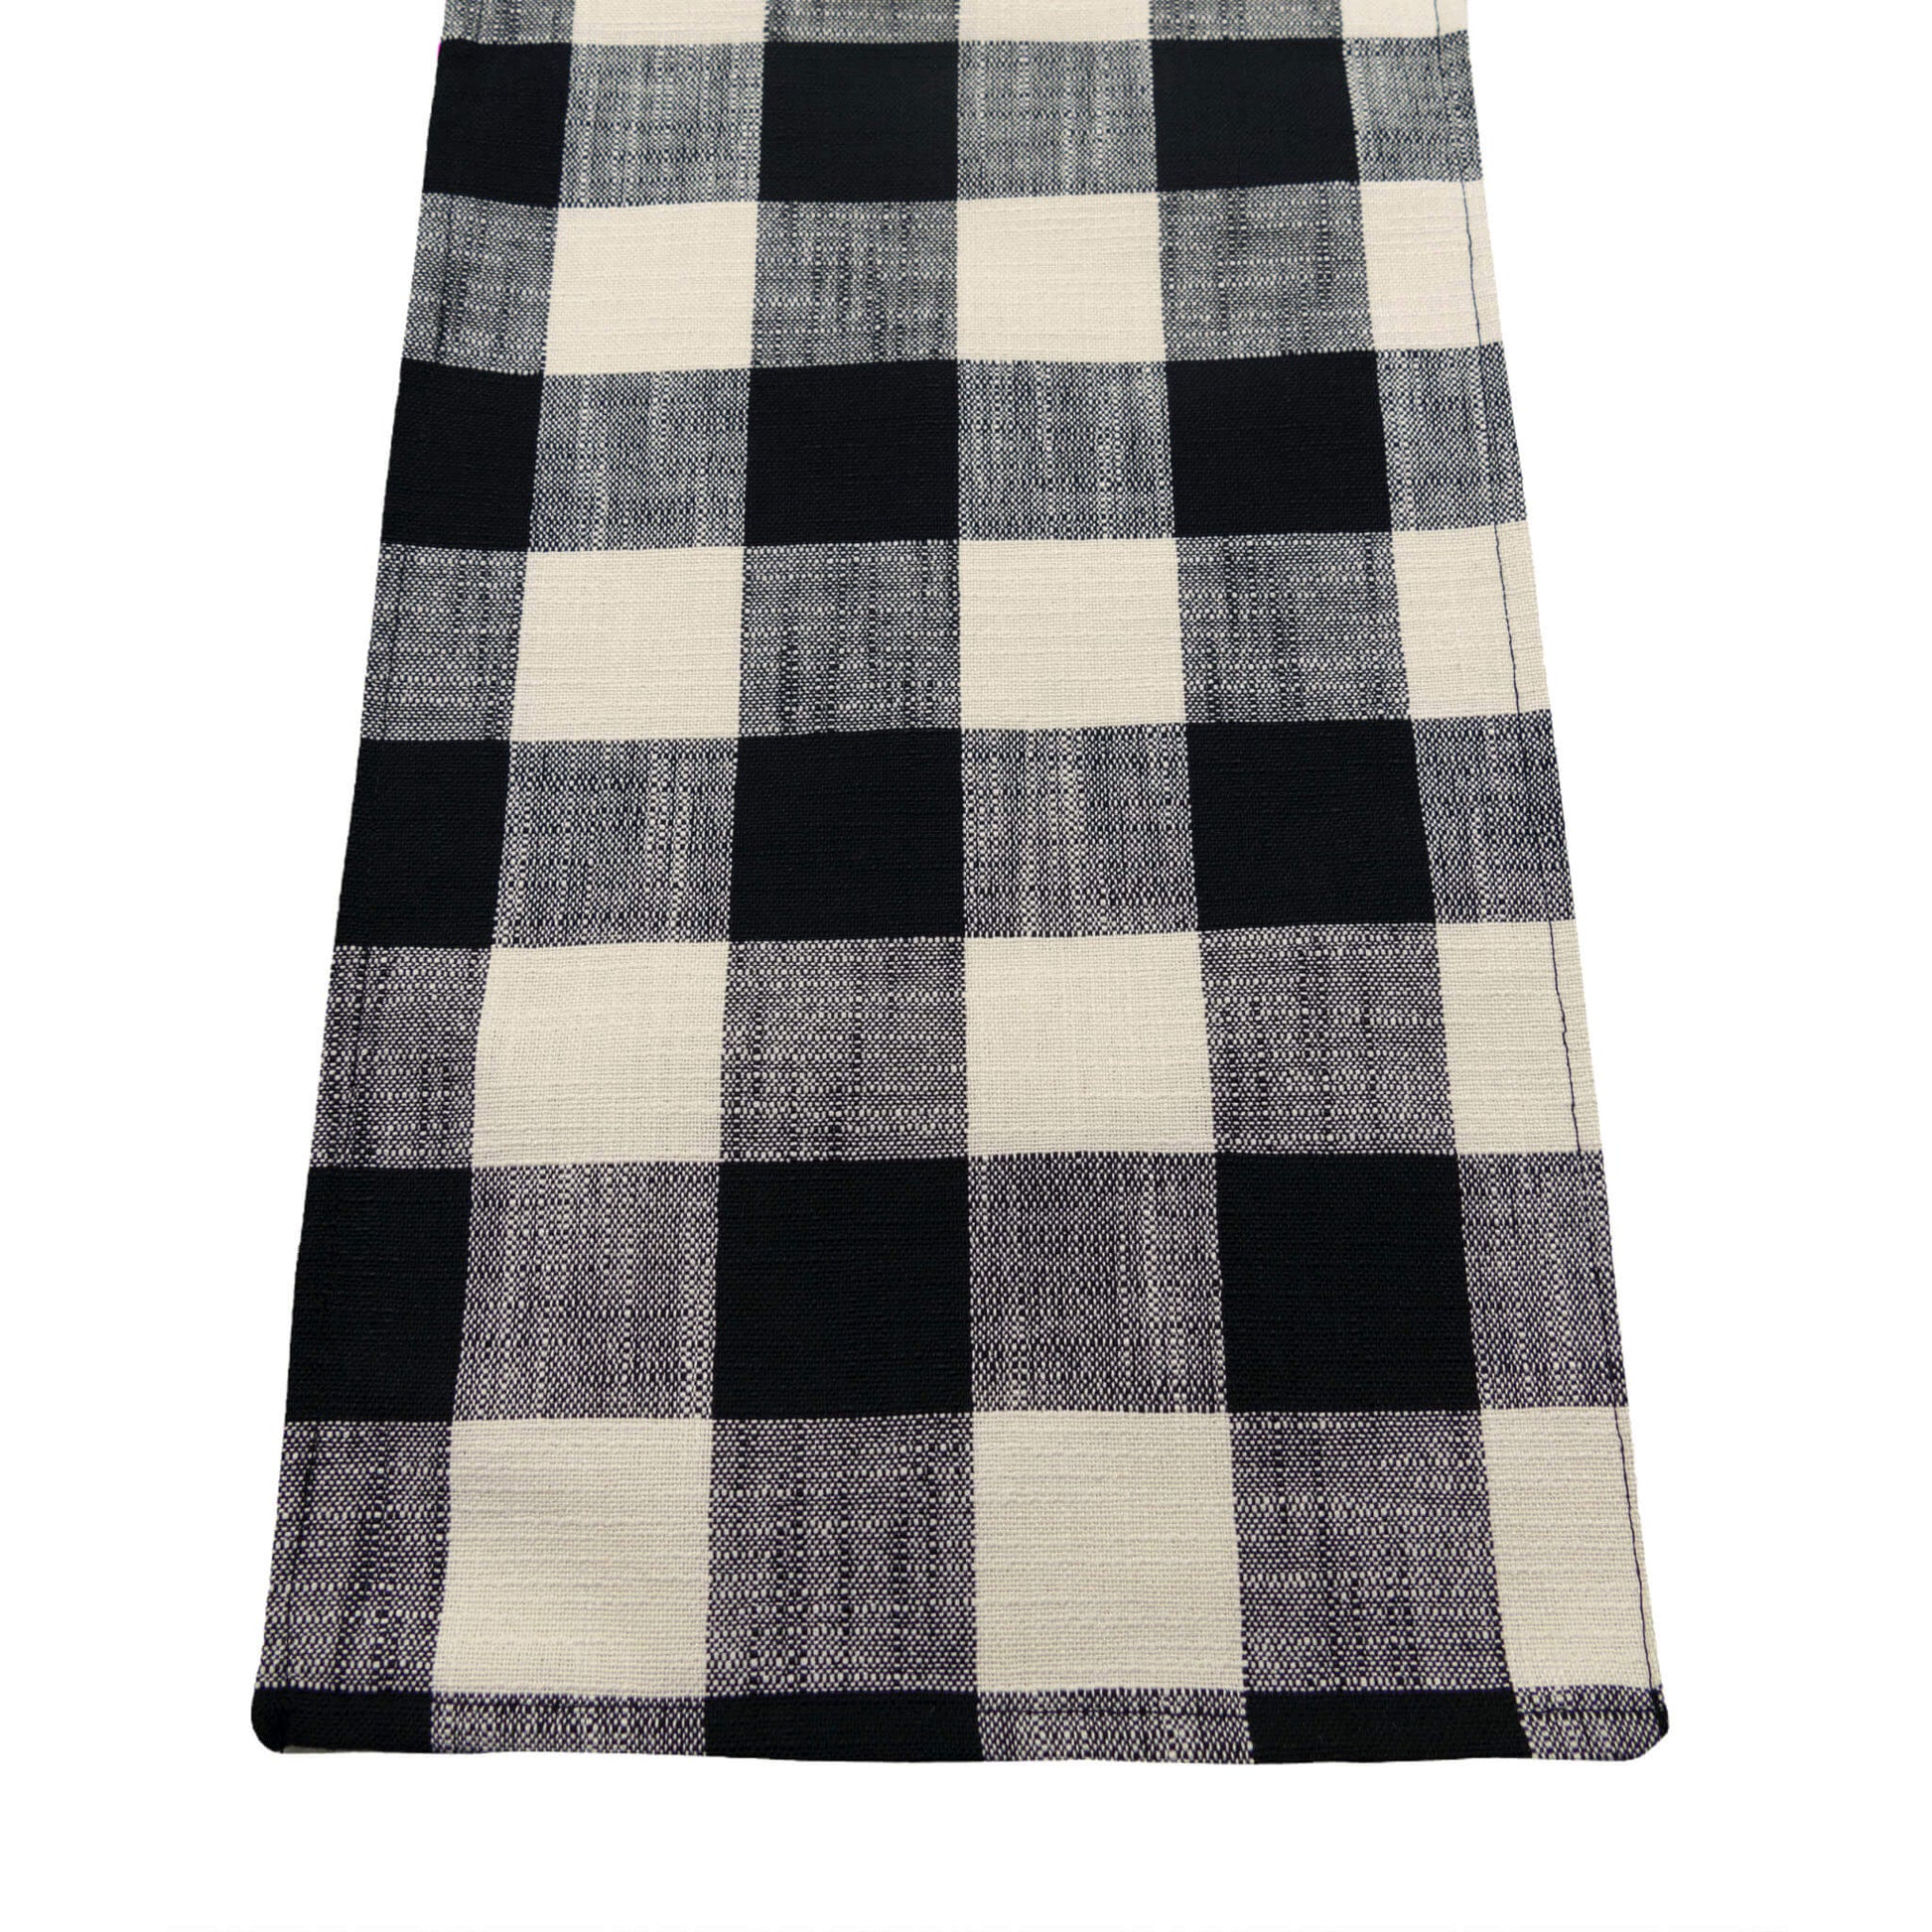 buffalo check table runner in black and white buffalo plaid